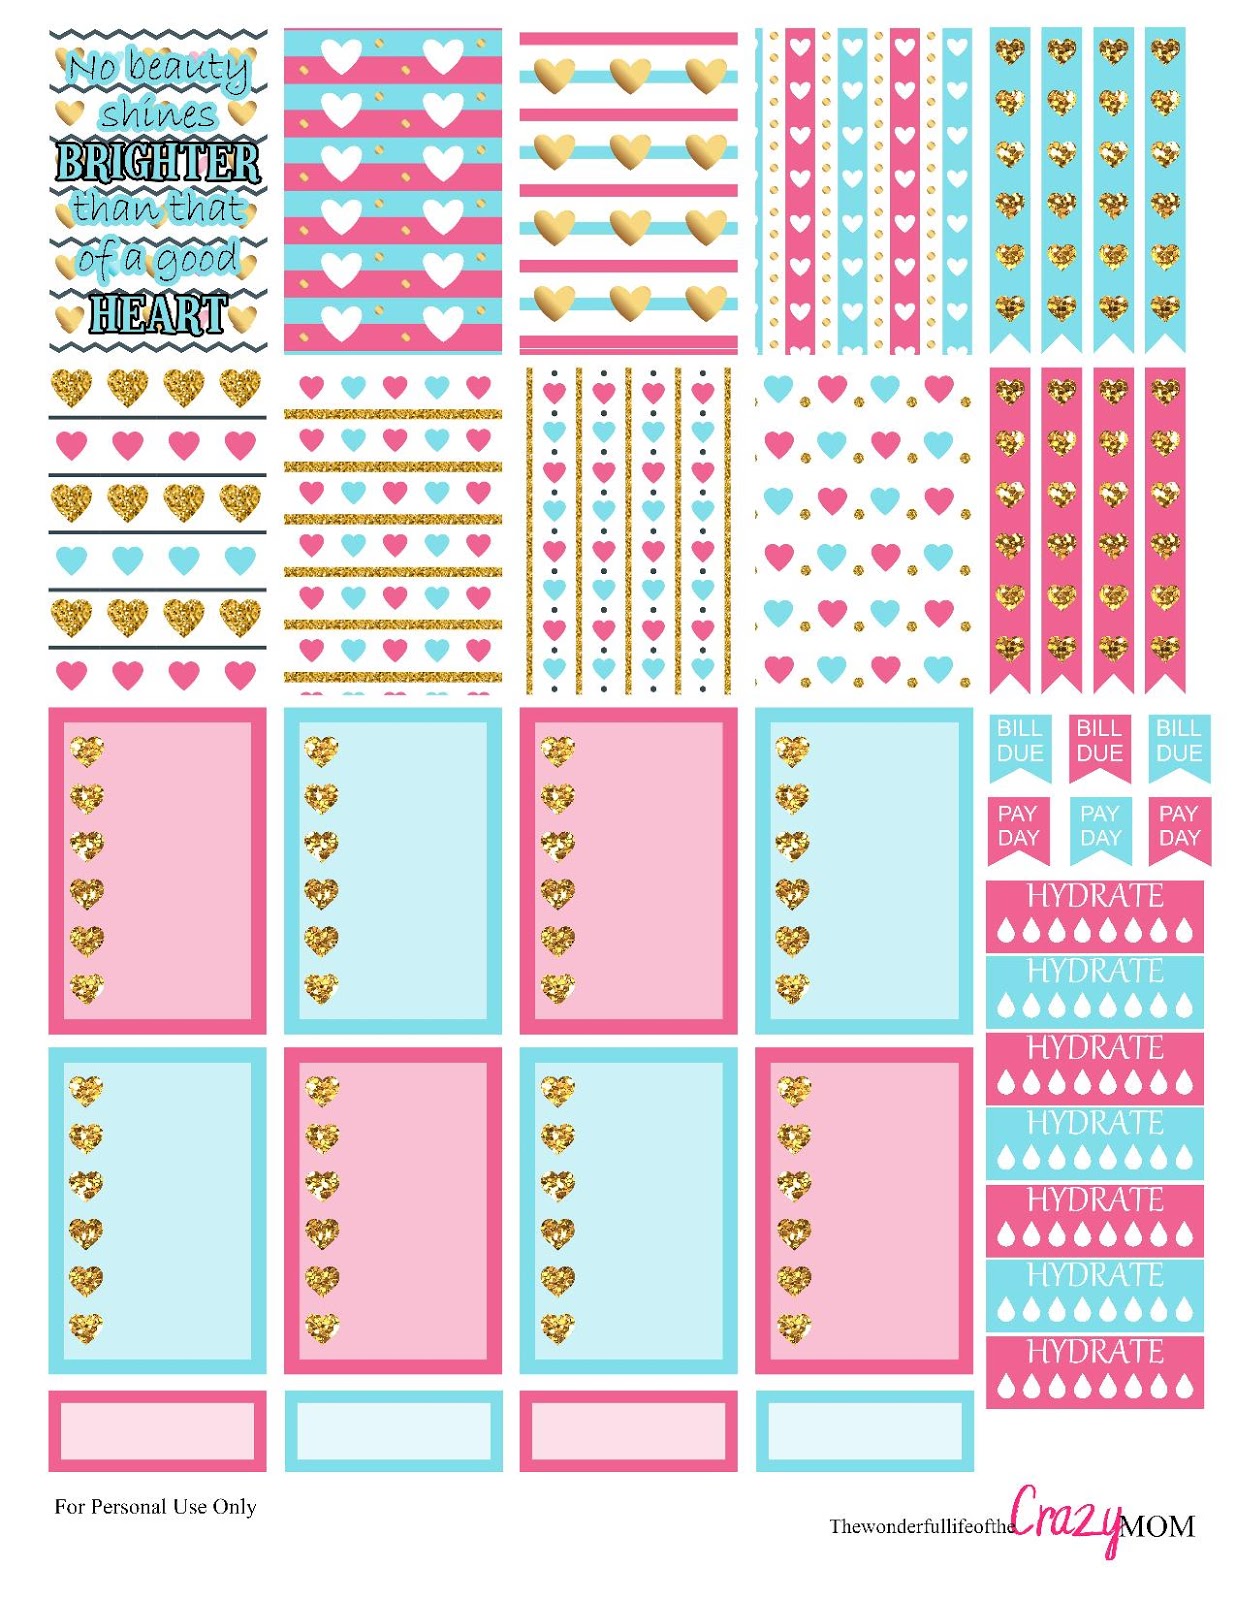 The Wonderful Life Of The Crazy Mom Full Of Hearts Free Happy Planner 